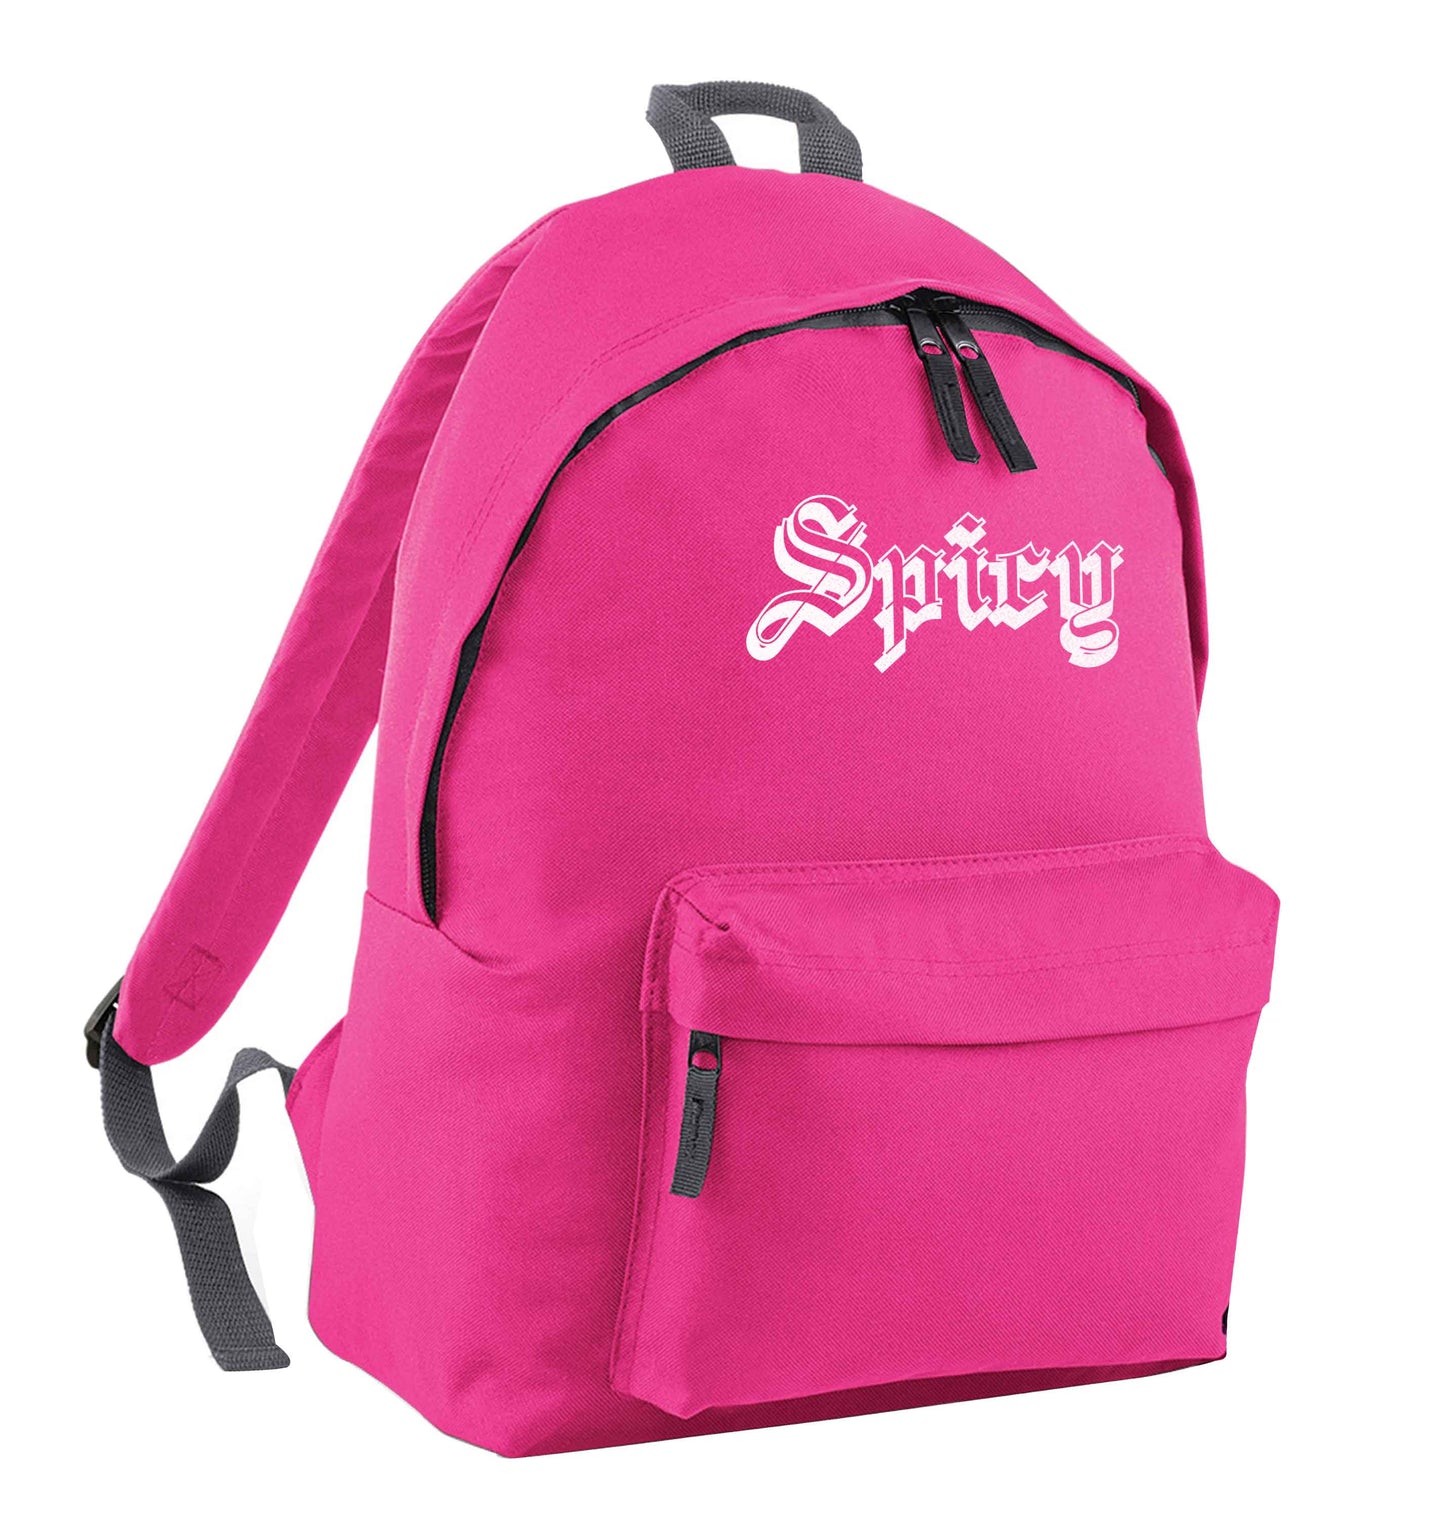 Spicy pink adults backpack